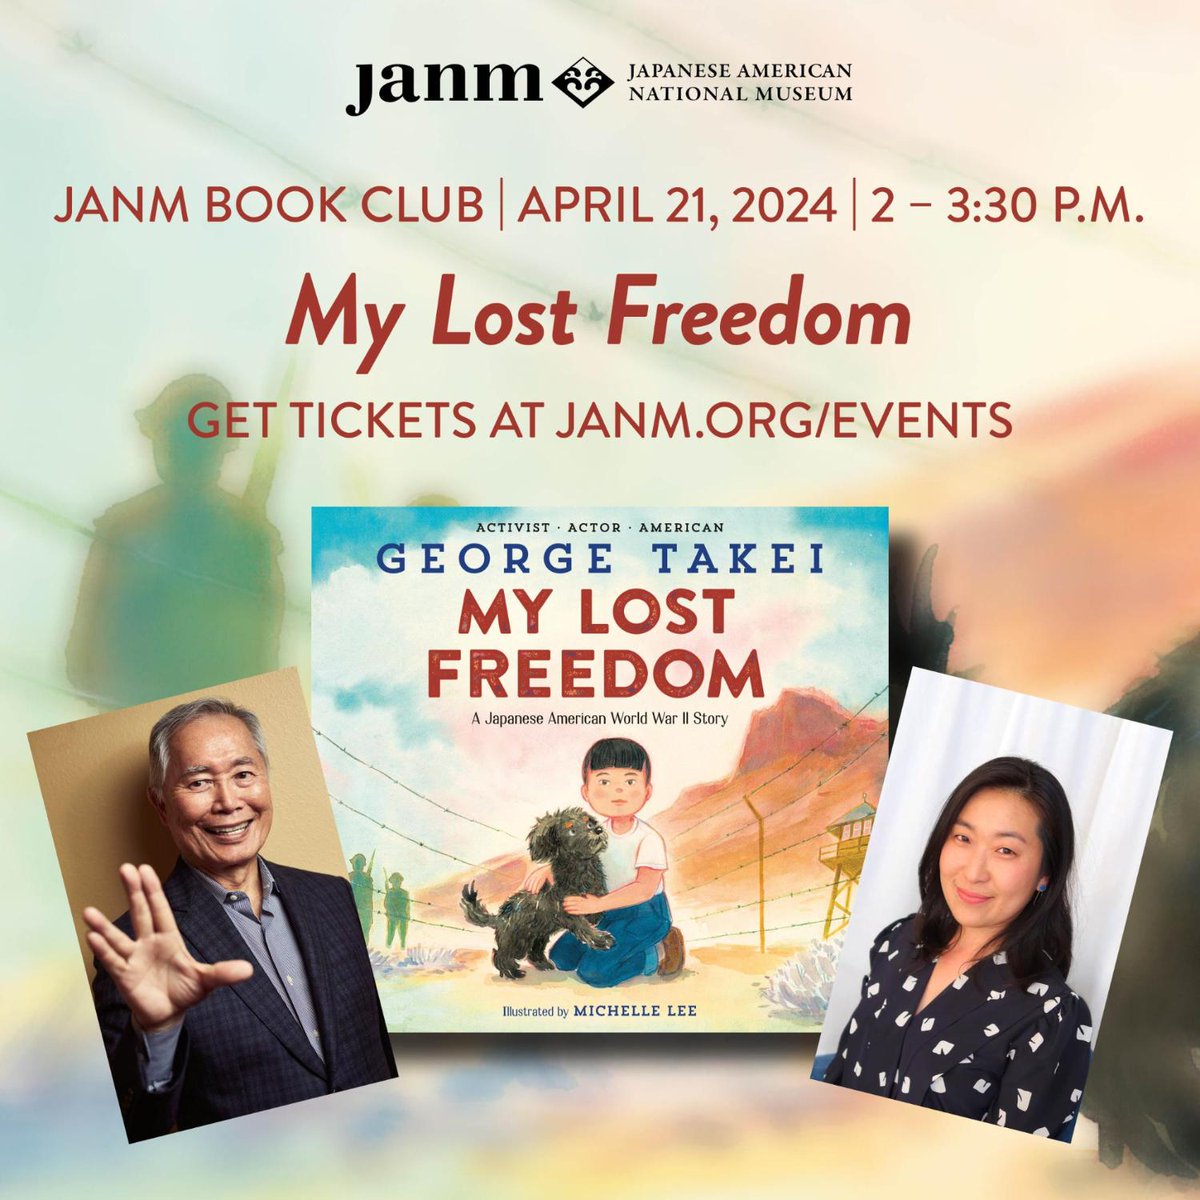 Join me and the talented illustrator of 'My Lost Freedom,' Michelle Lee, at the @jamuseum on Sunday, April 21st to celebrate the launch of my new picture book! 📚 Learn all about the event and secure your tickets at janm.org/events. Can't wait to see you there, friends!